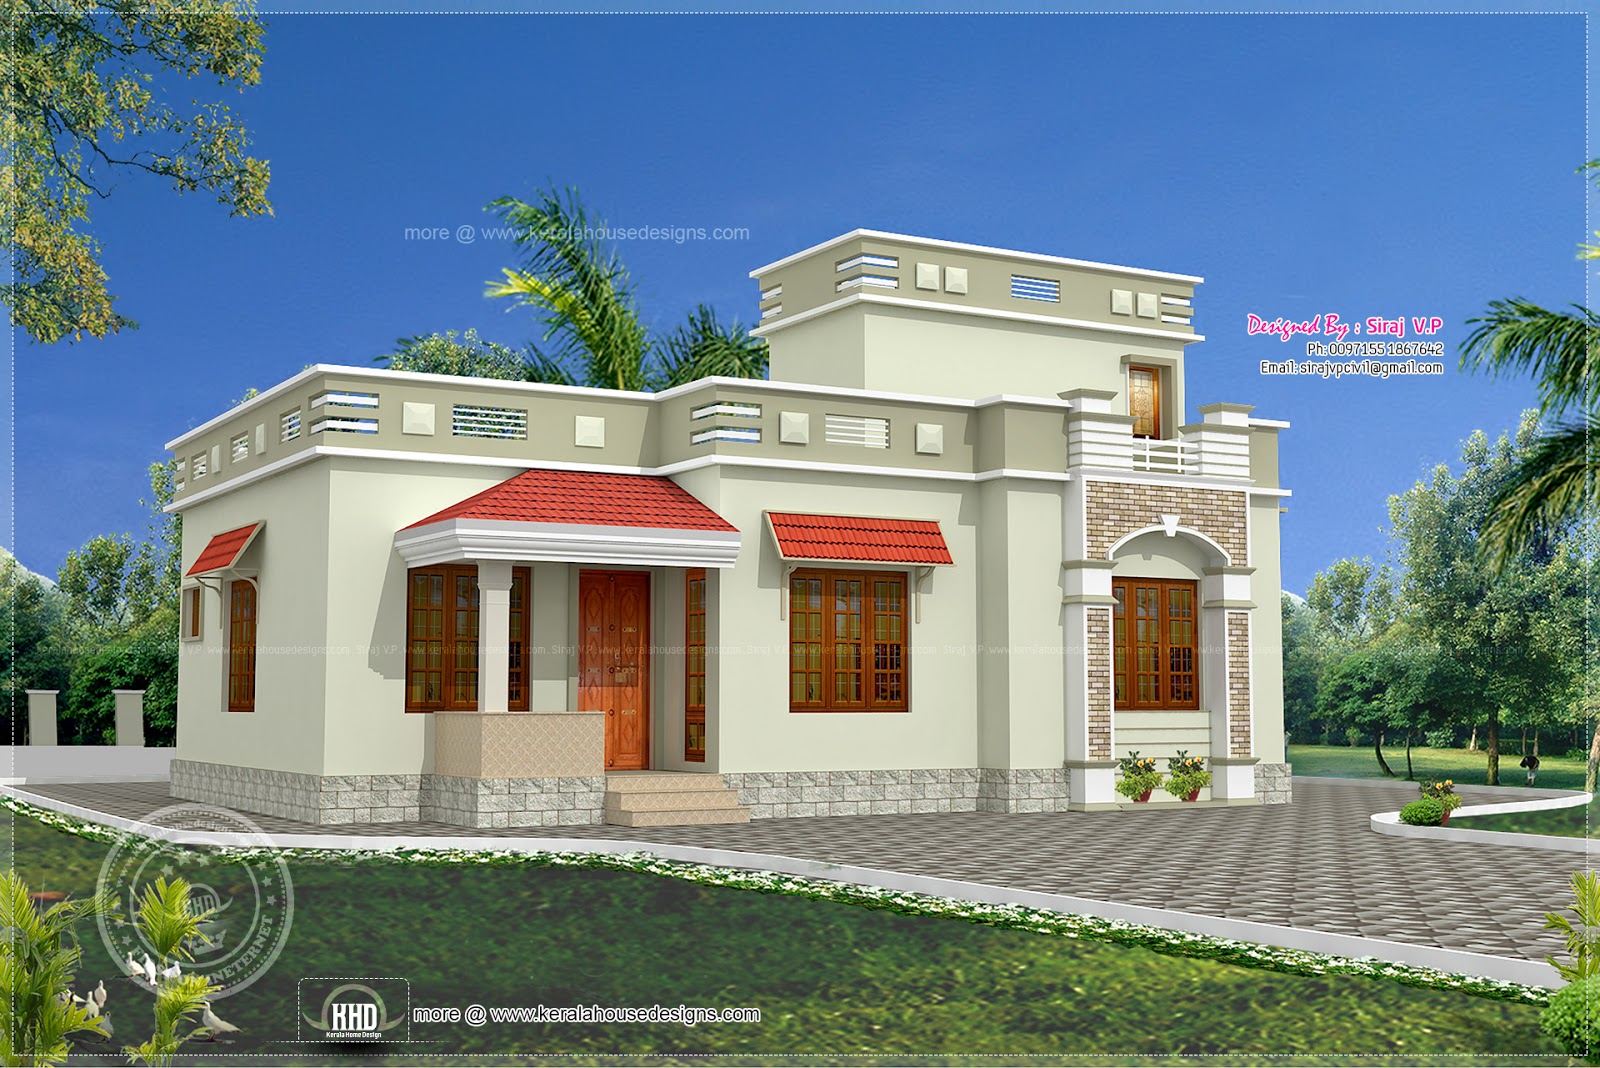 Low budget Kerala style home in 1075 sq.feet | House Design Plans